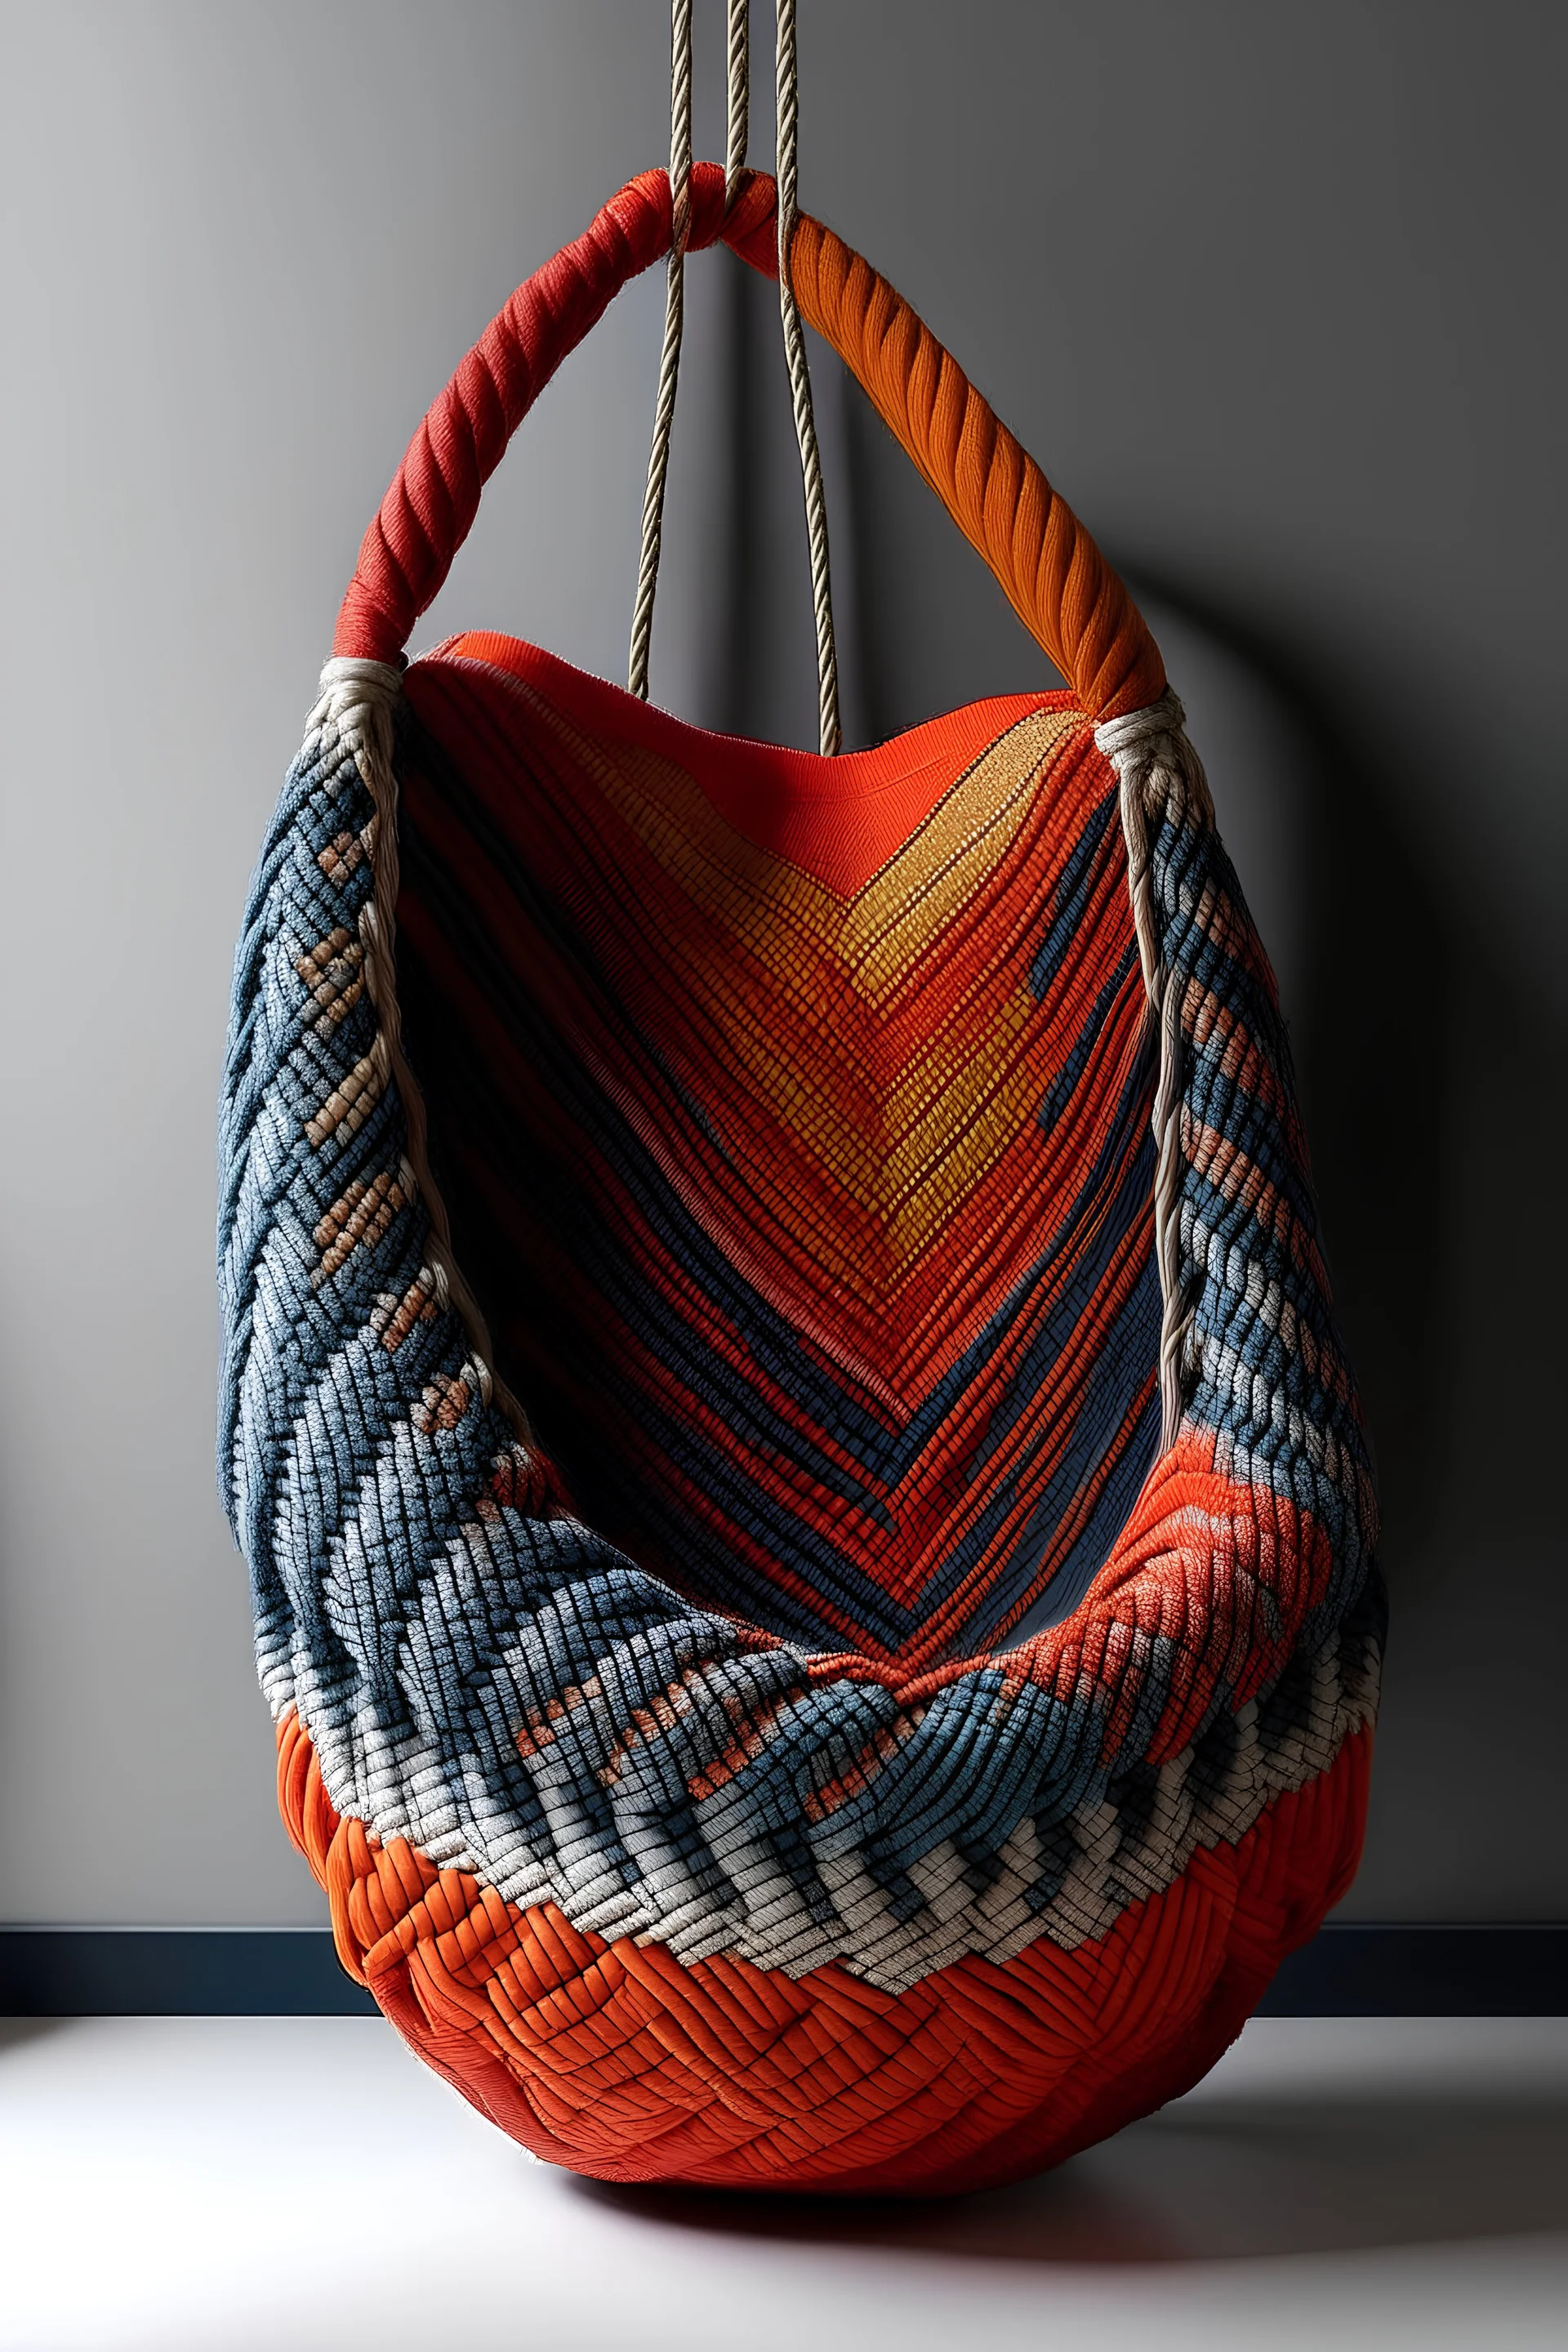 innovative design of a woven hanging inspired by Egyptian folklore with popular colour